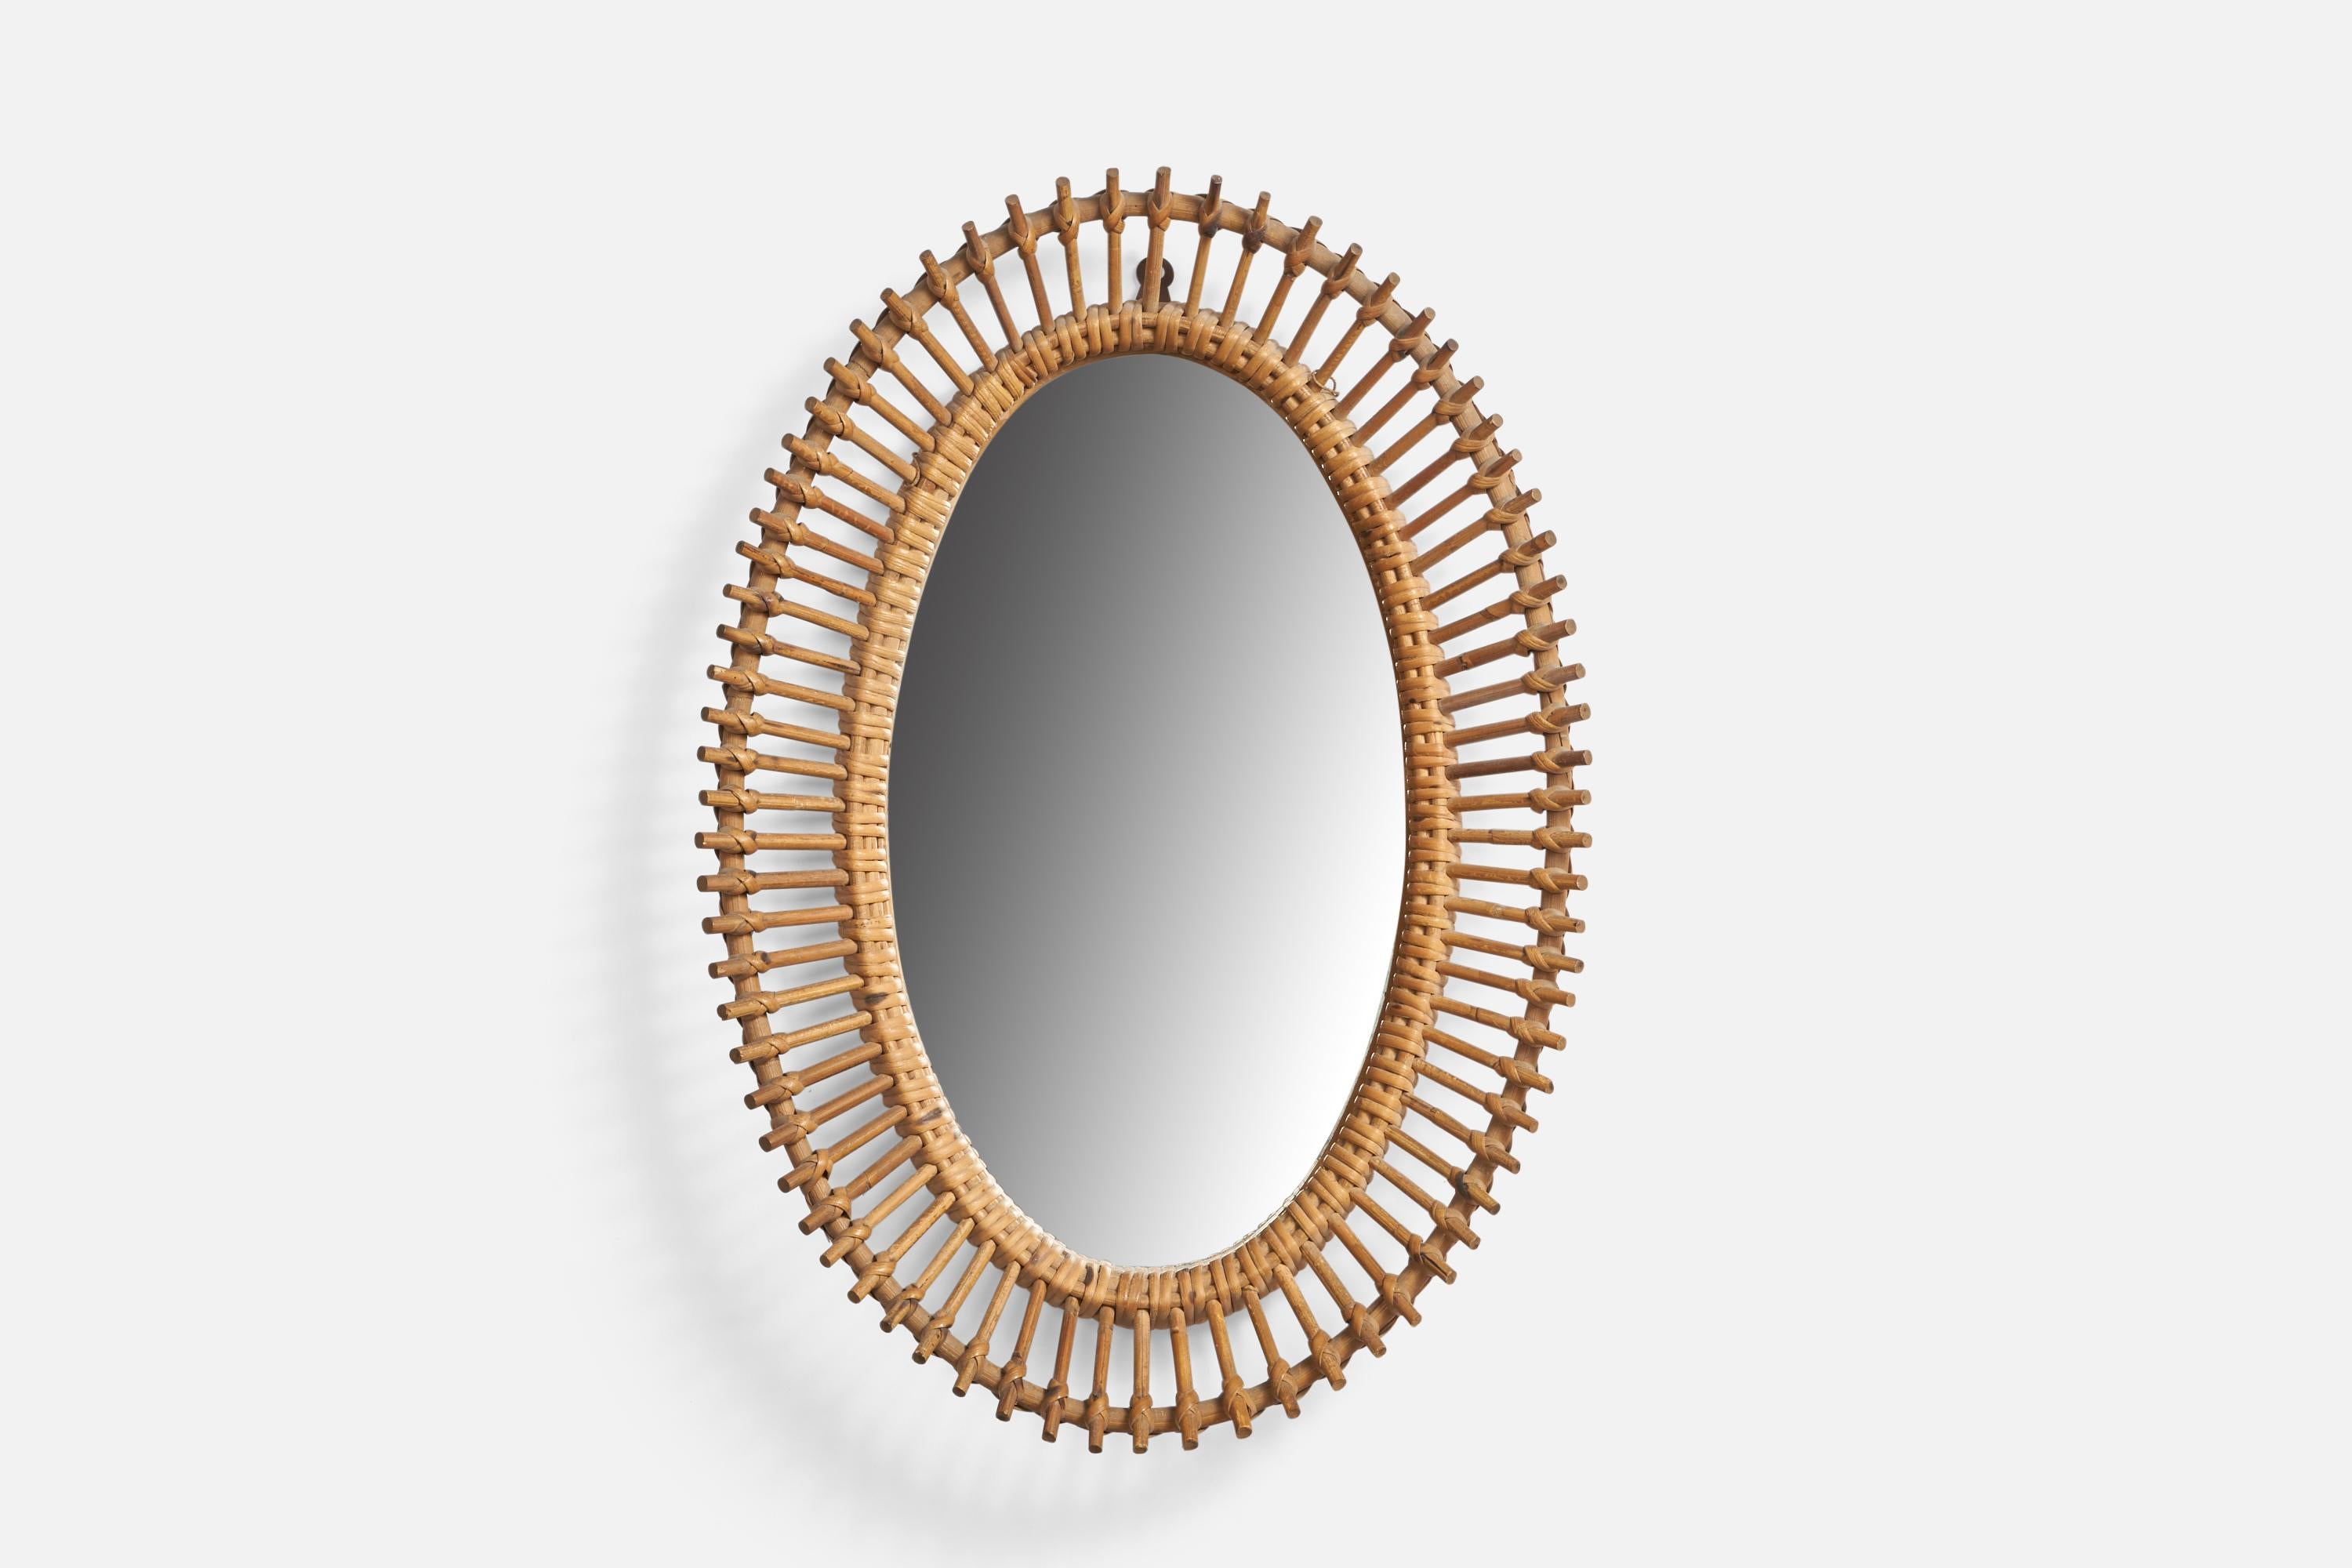 A rattan wall mirror designed and produced in Italy, 1960s.